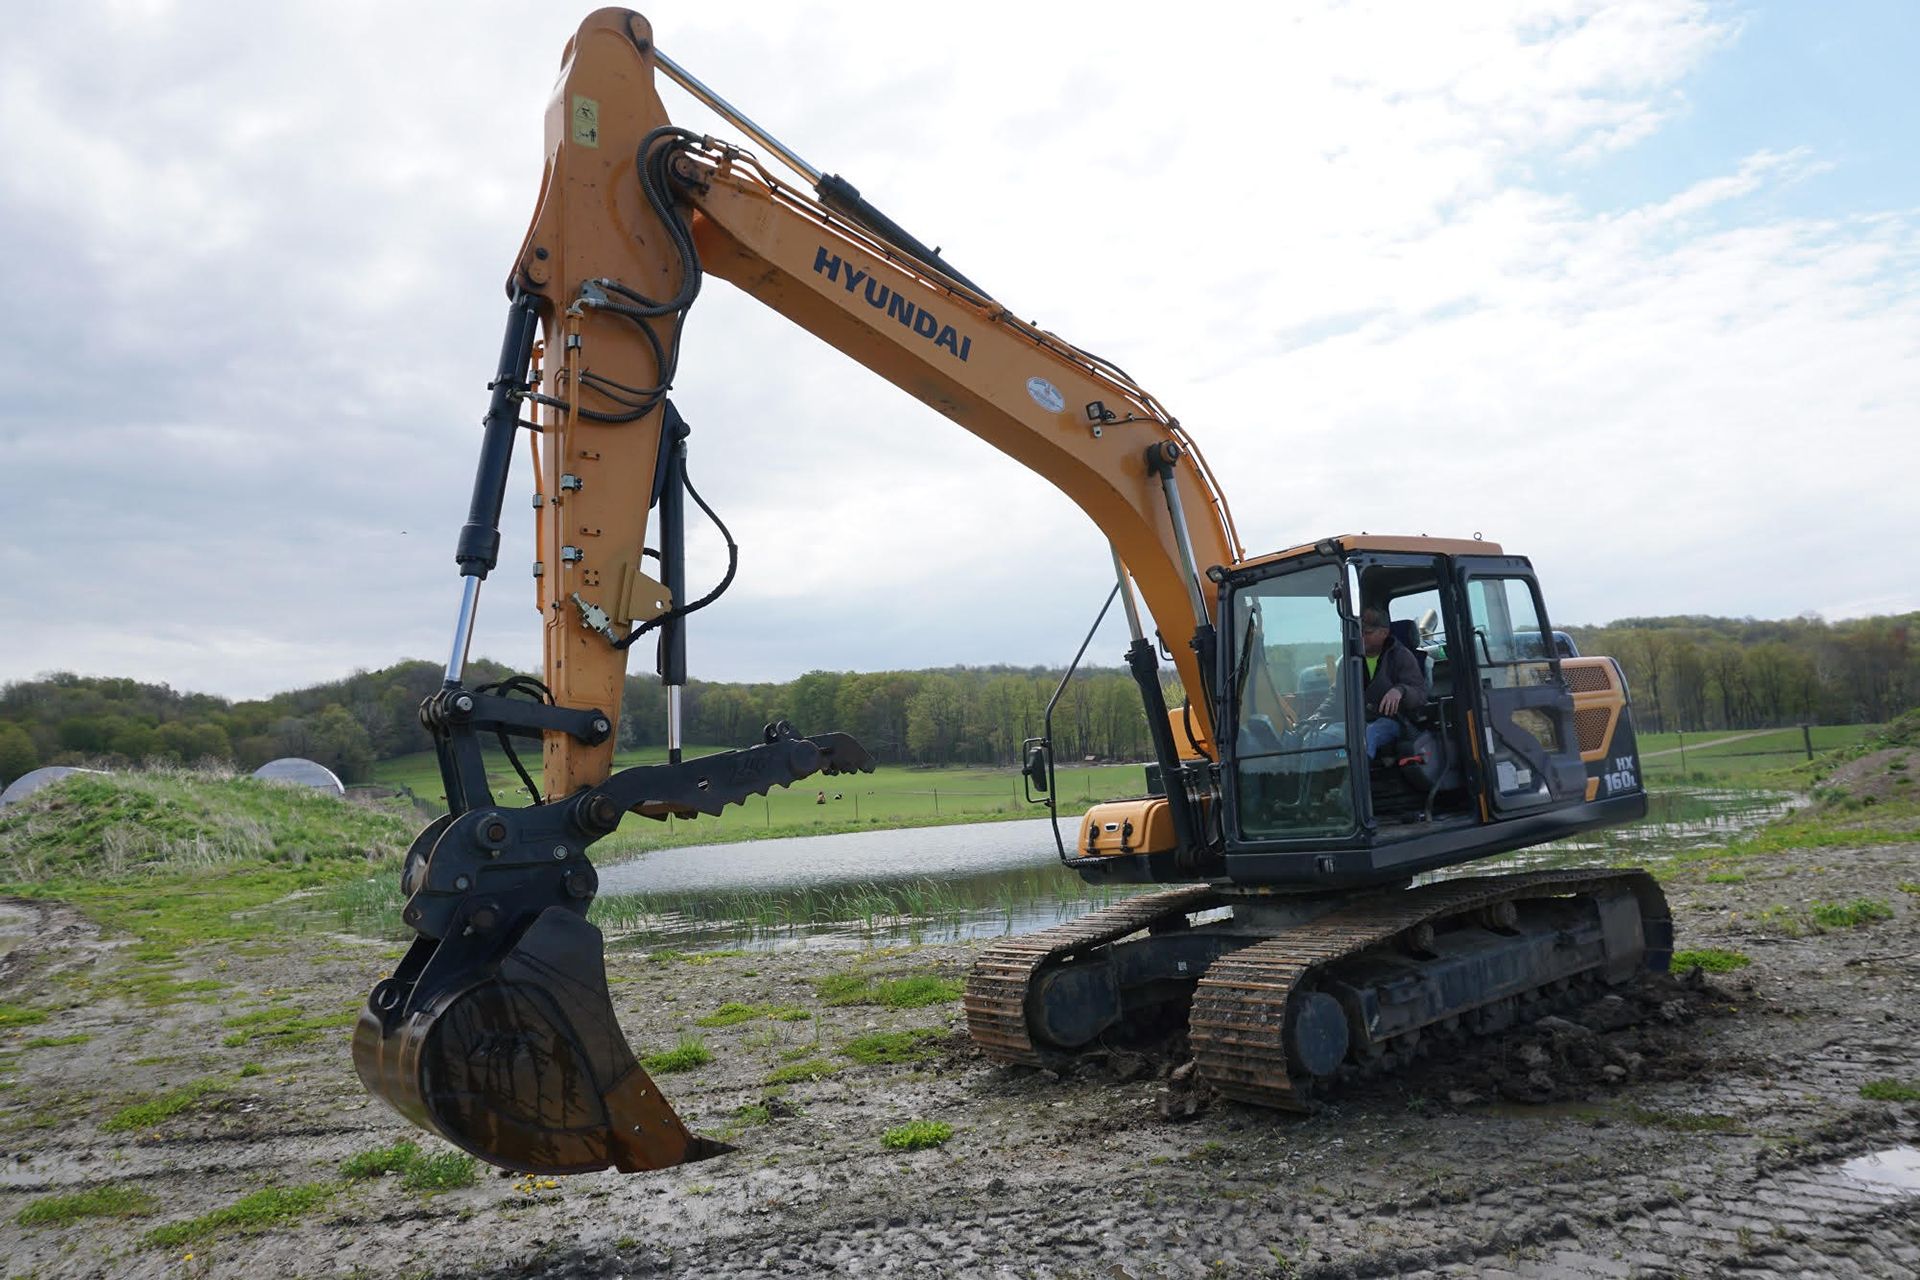 Ed demonstrates the versatility of his Hyundai HX160L excavator equipped with a Tag Bucket and thumb with a Dromone Quick Coupler